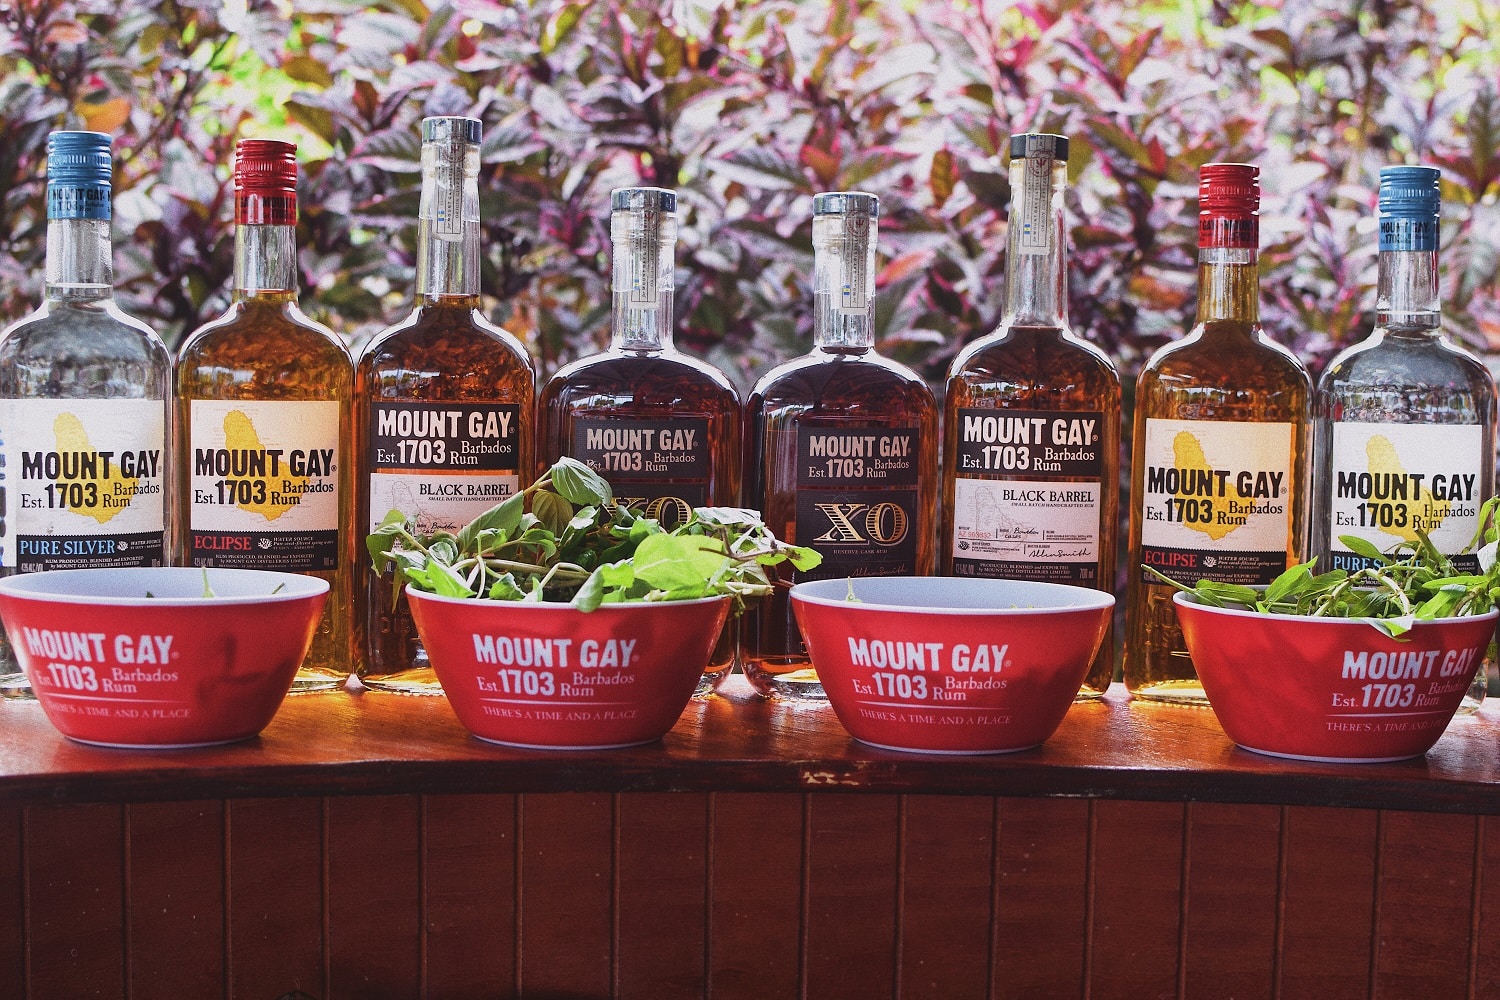 Lineup of Mount Gay Rum bottles and garnishes